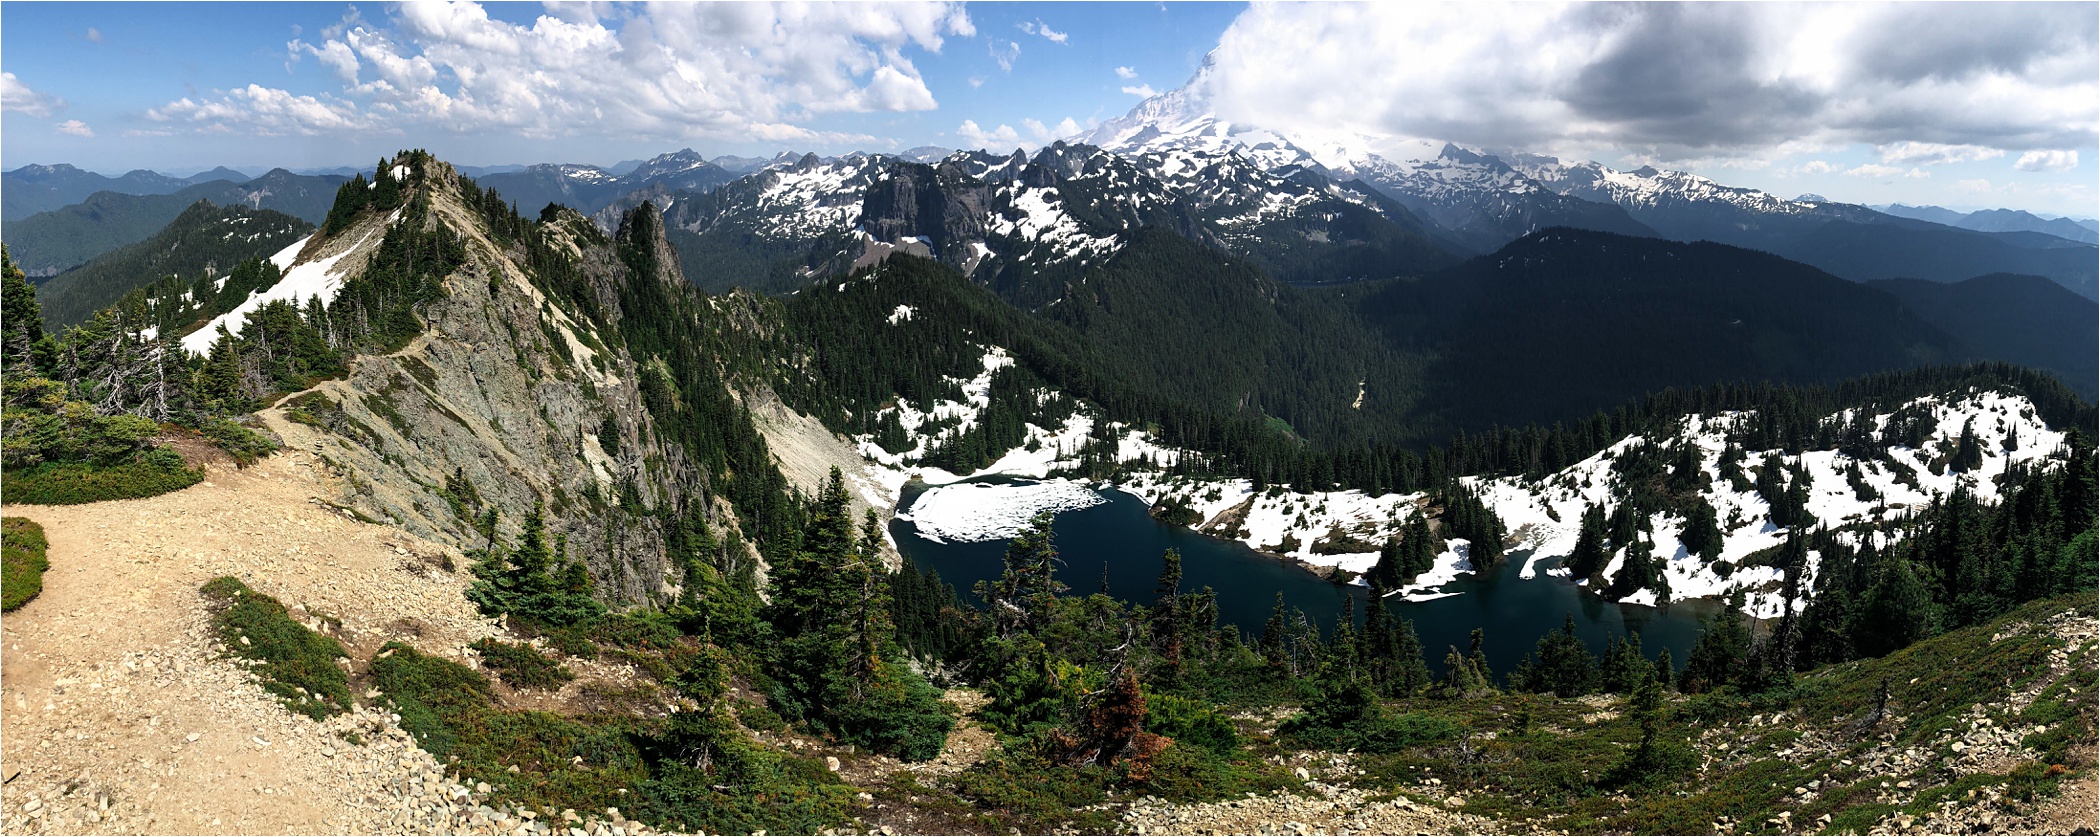 Tolmie Peak lookout location photos as one of the best places to elope at Mt. Rainier